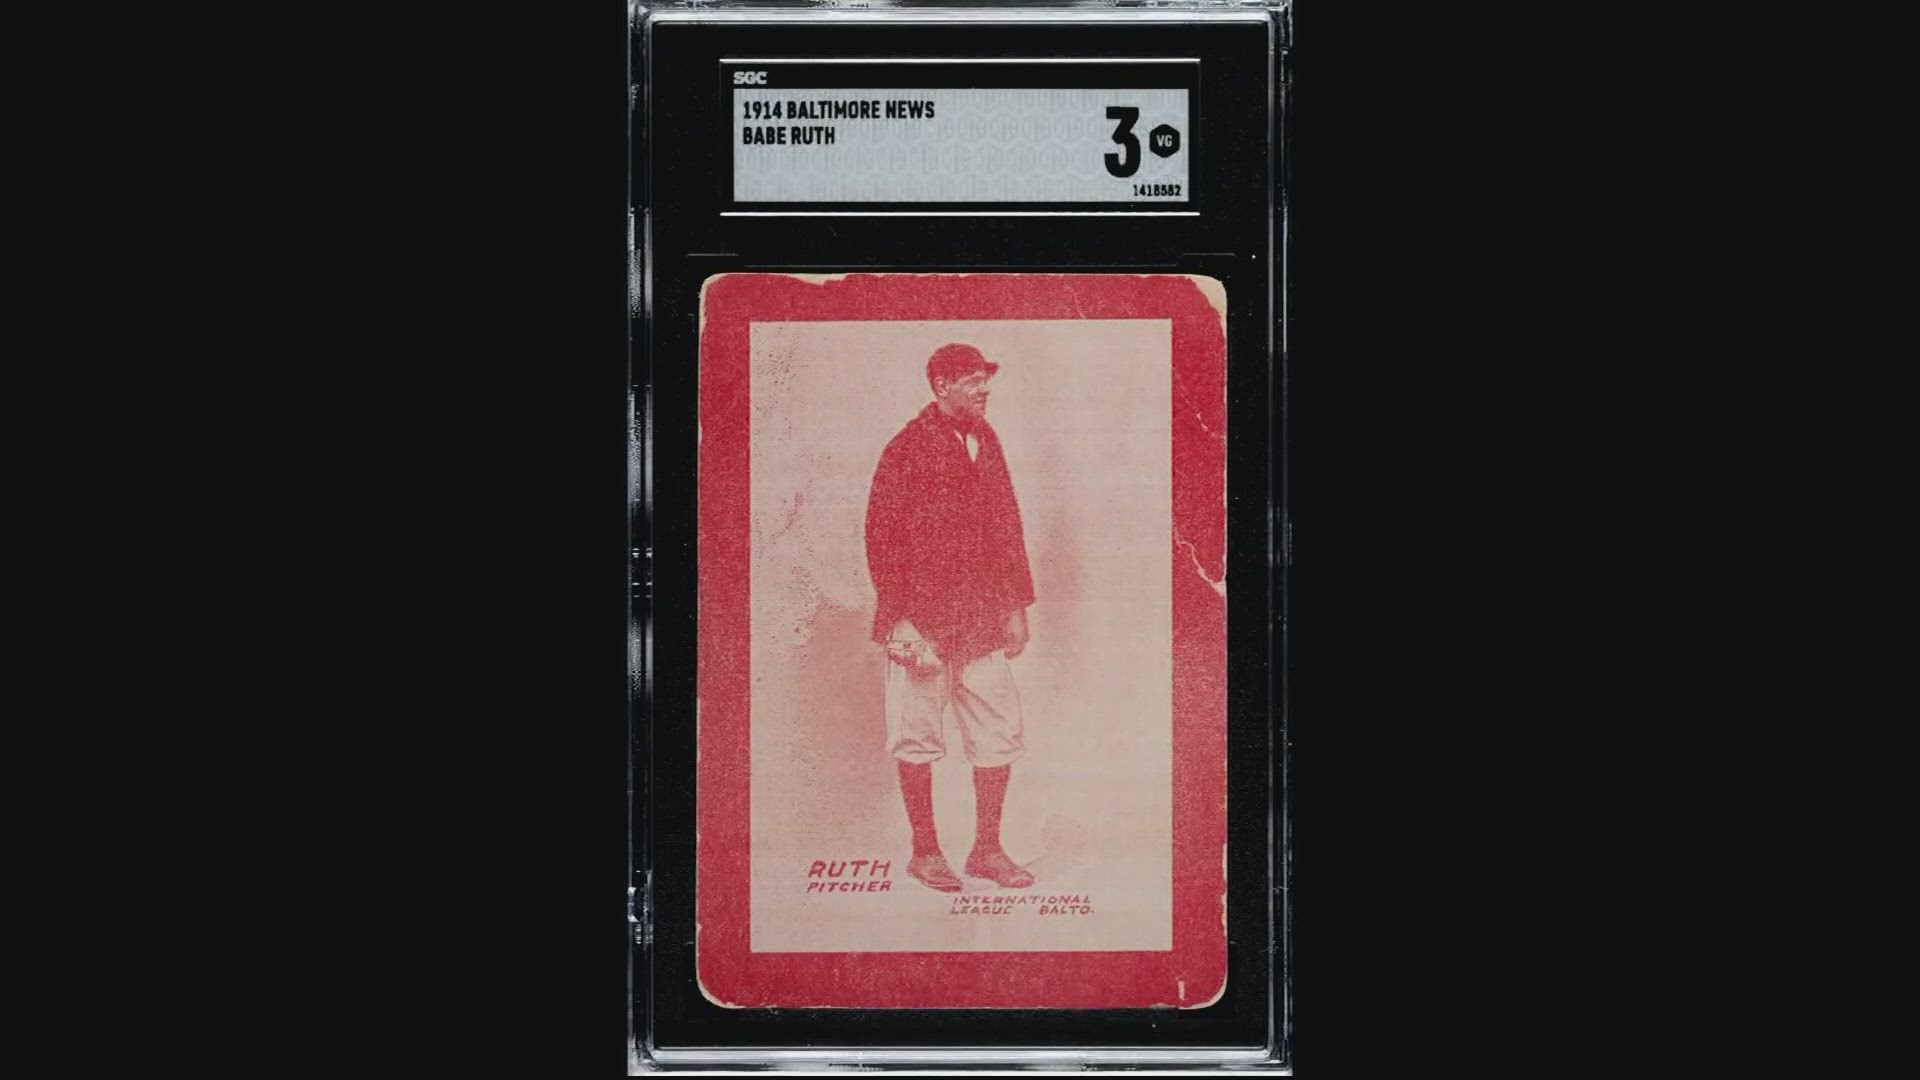 A RARE BASEBALL CARD DREW BIG MONEY AT AN AUCTION IN BALTIMORE THIS WEEK.